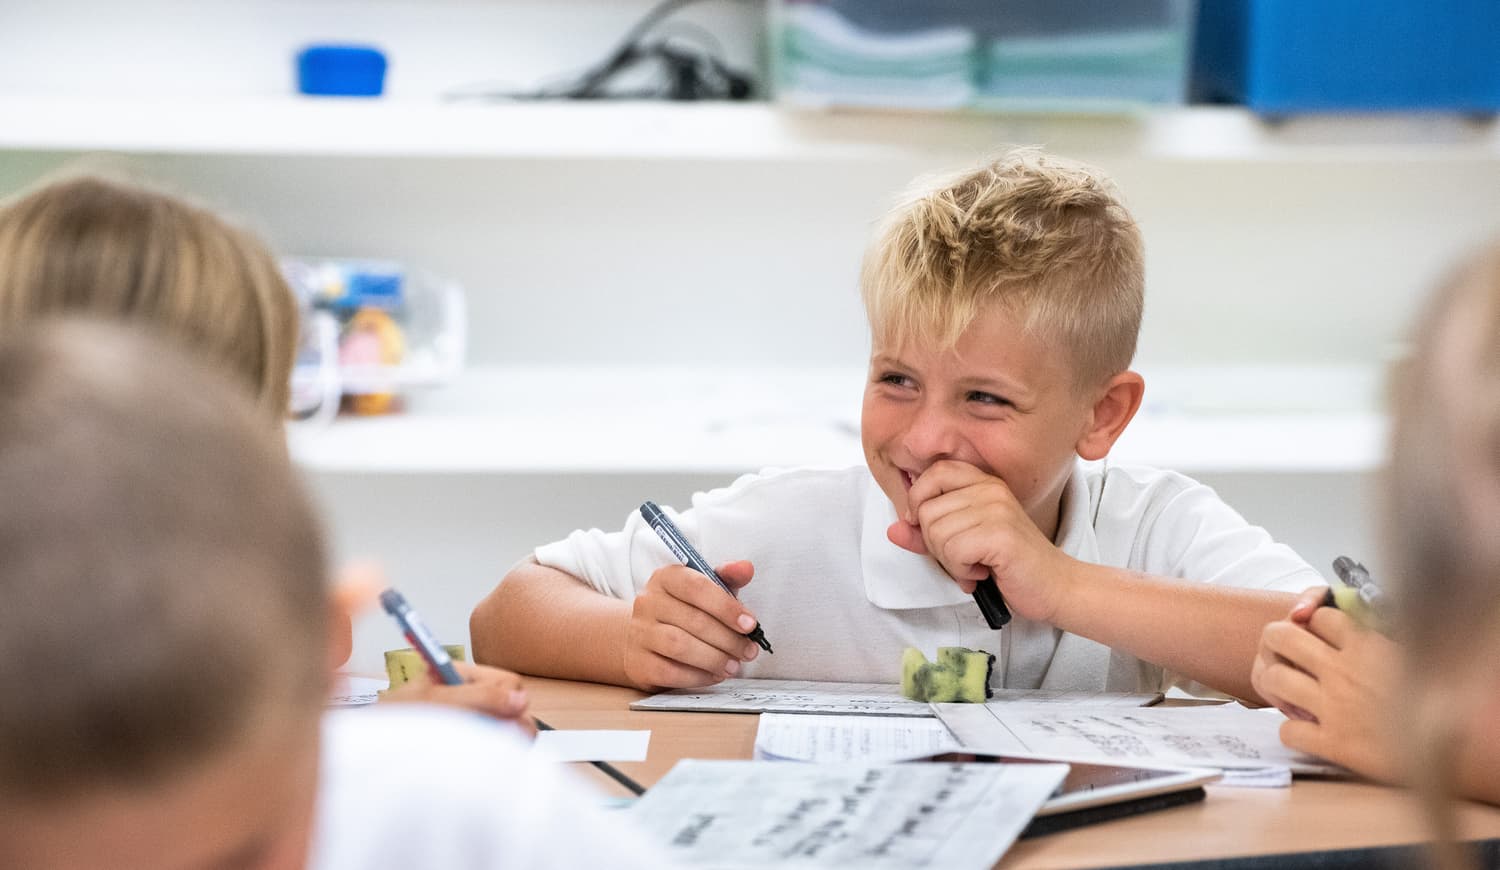 Student smiling in class and writting